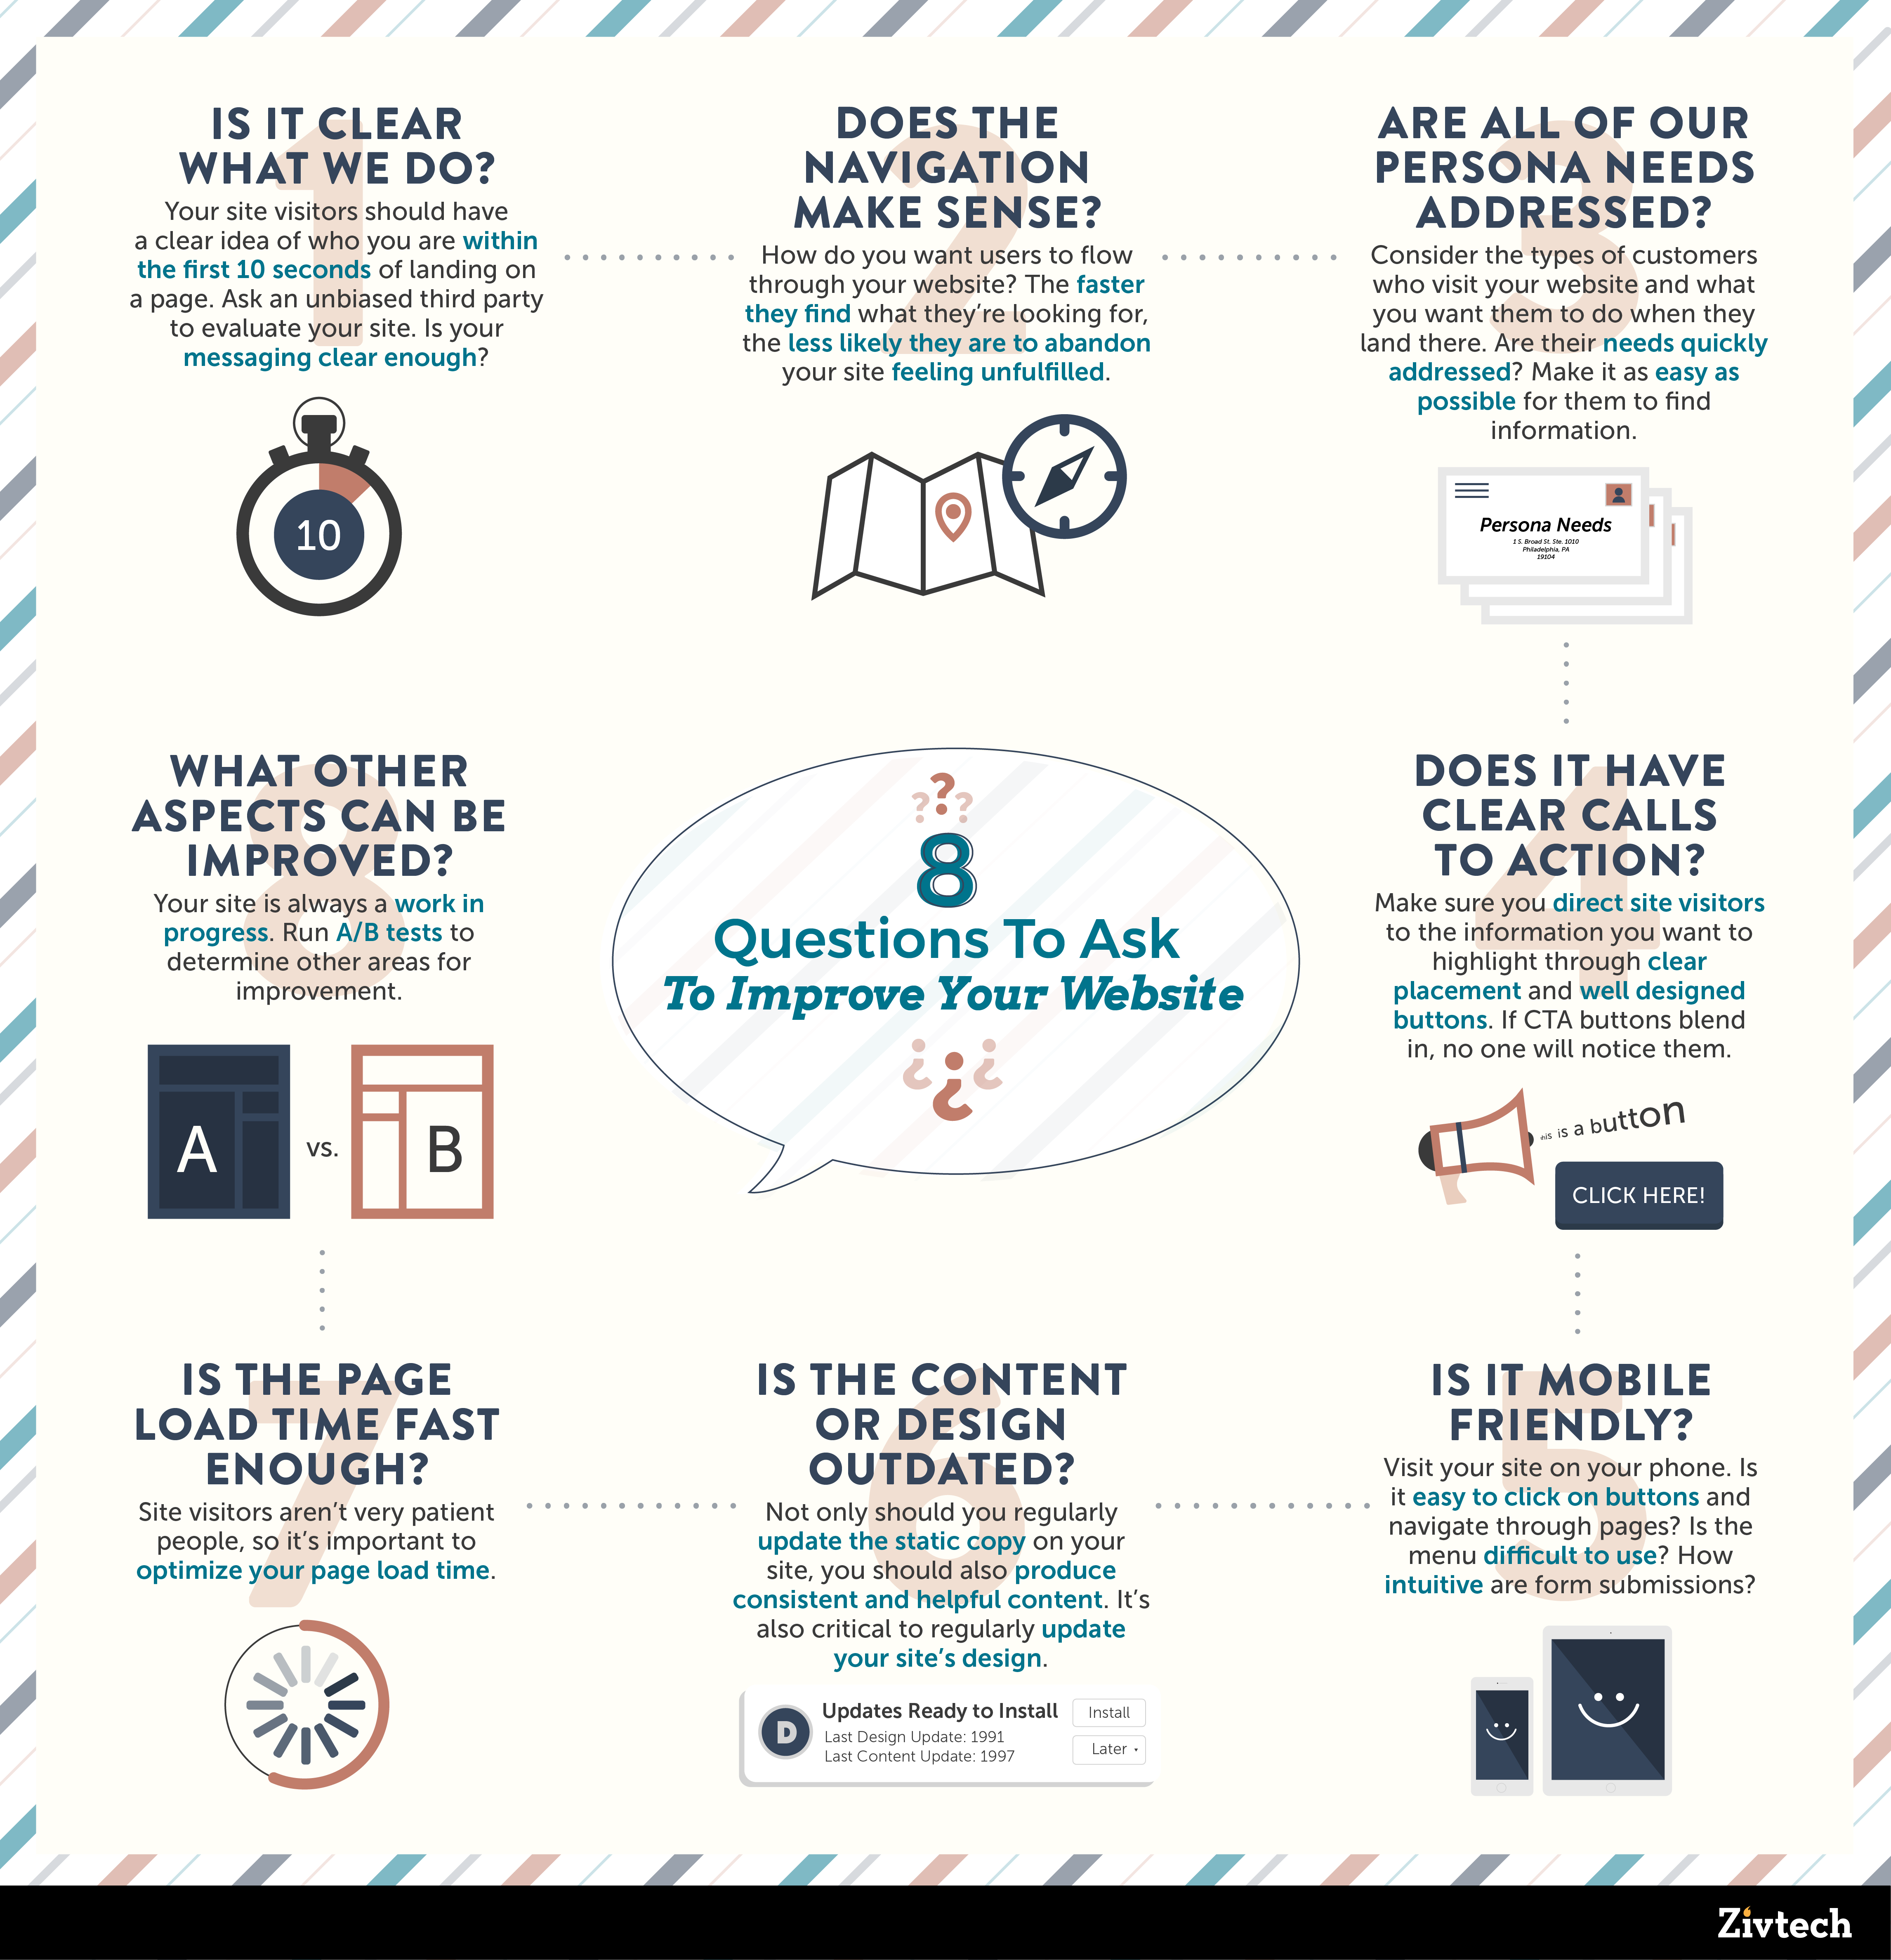 8 QUESTIONS TO ASK TO IMPROVE YOUR WEBSITE INFOGRAPHIC